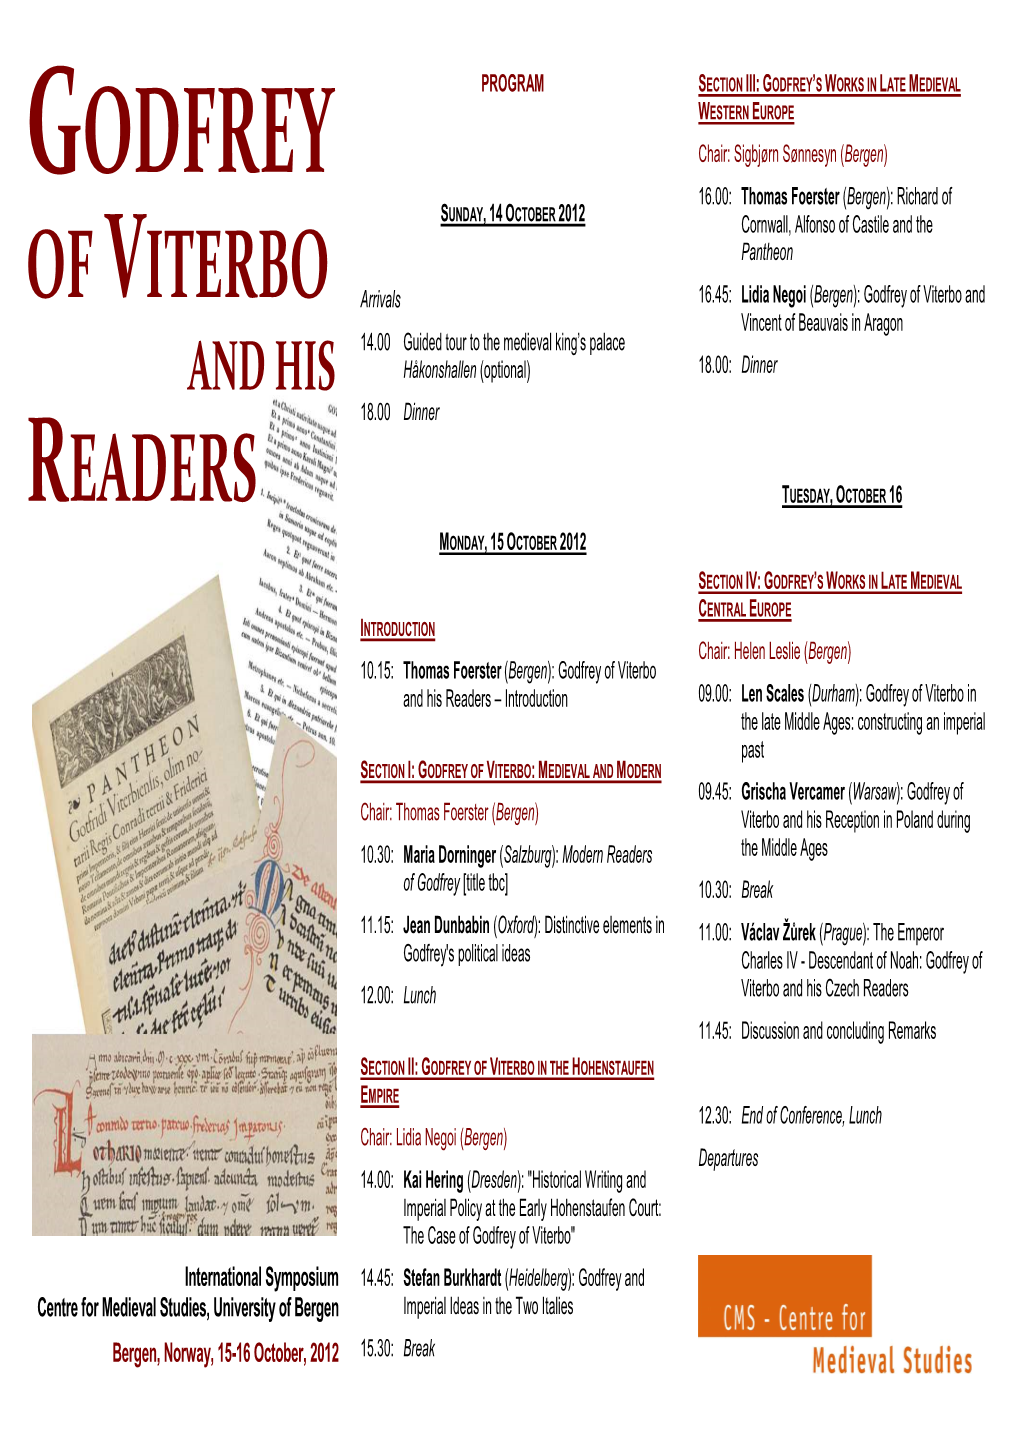 Godfrey of Viterbo and His Readers